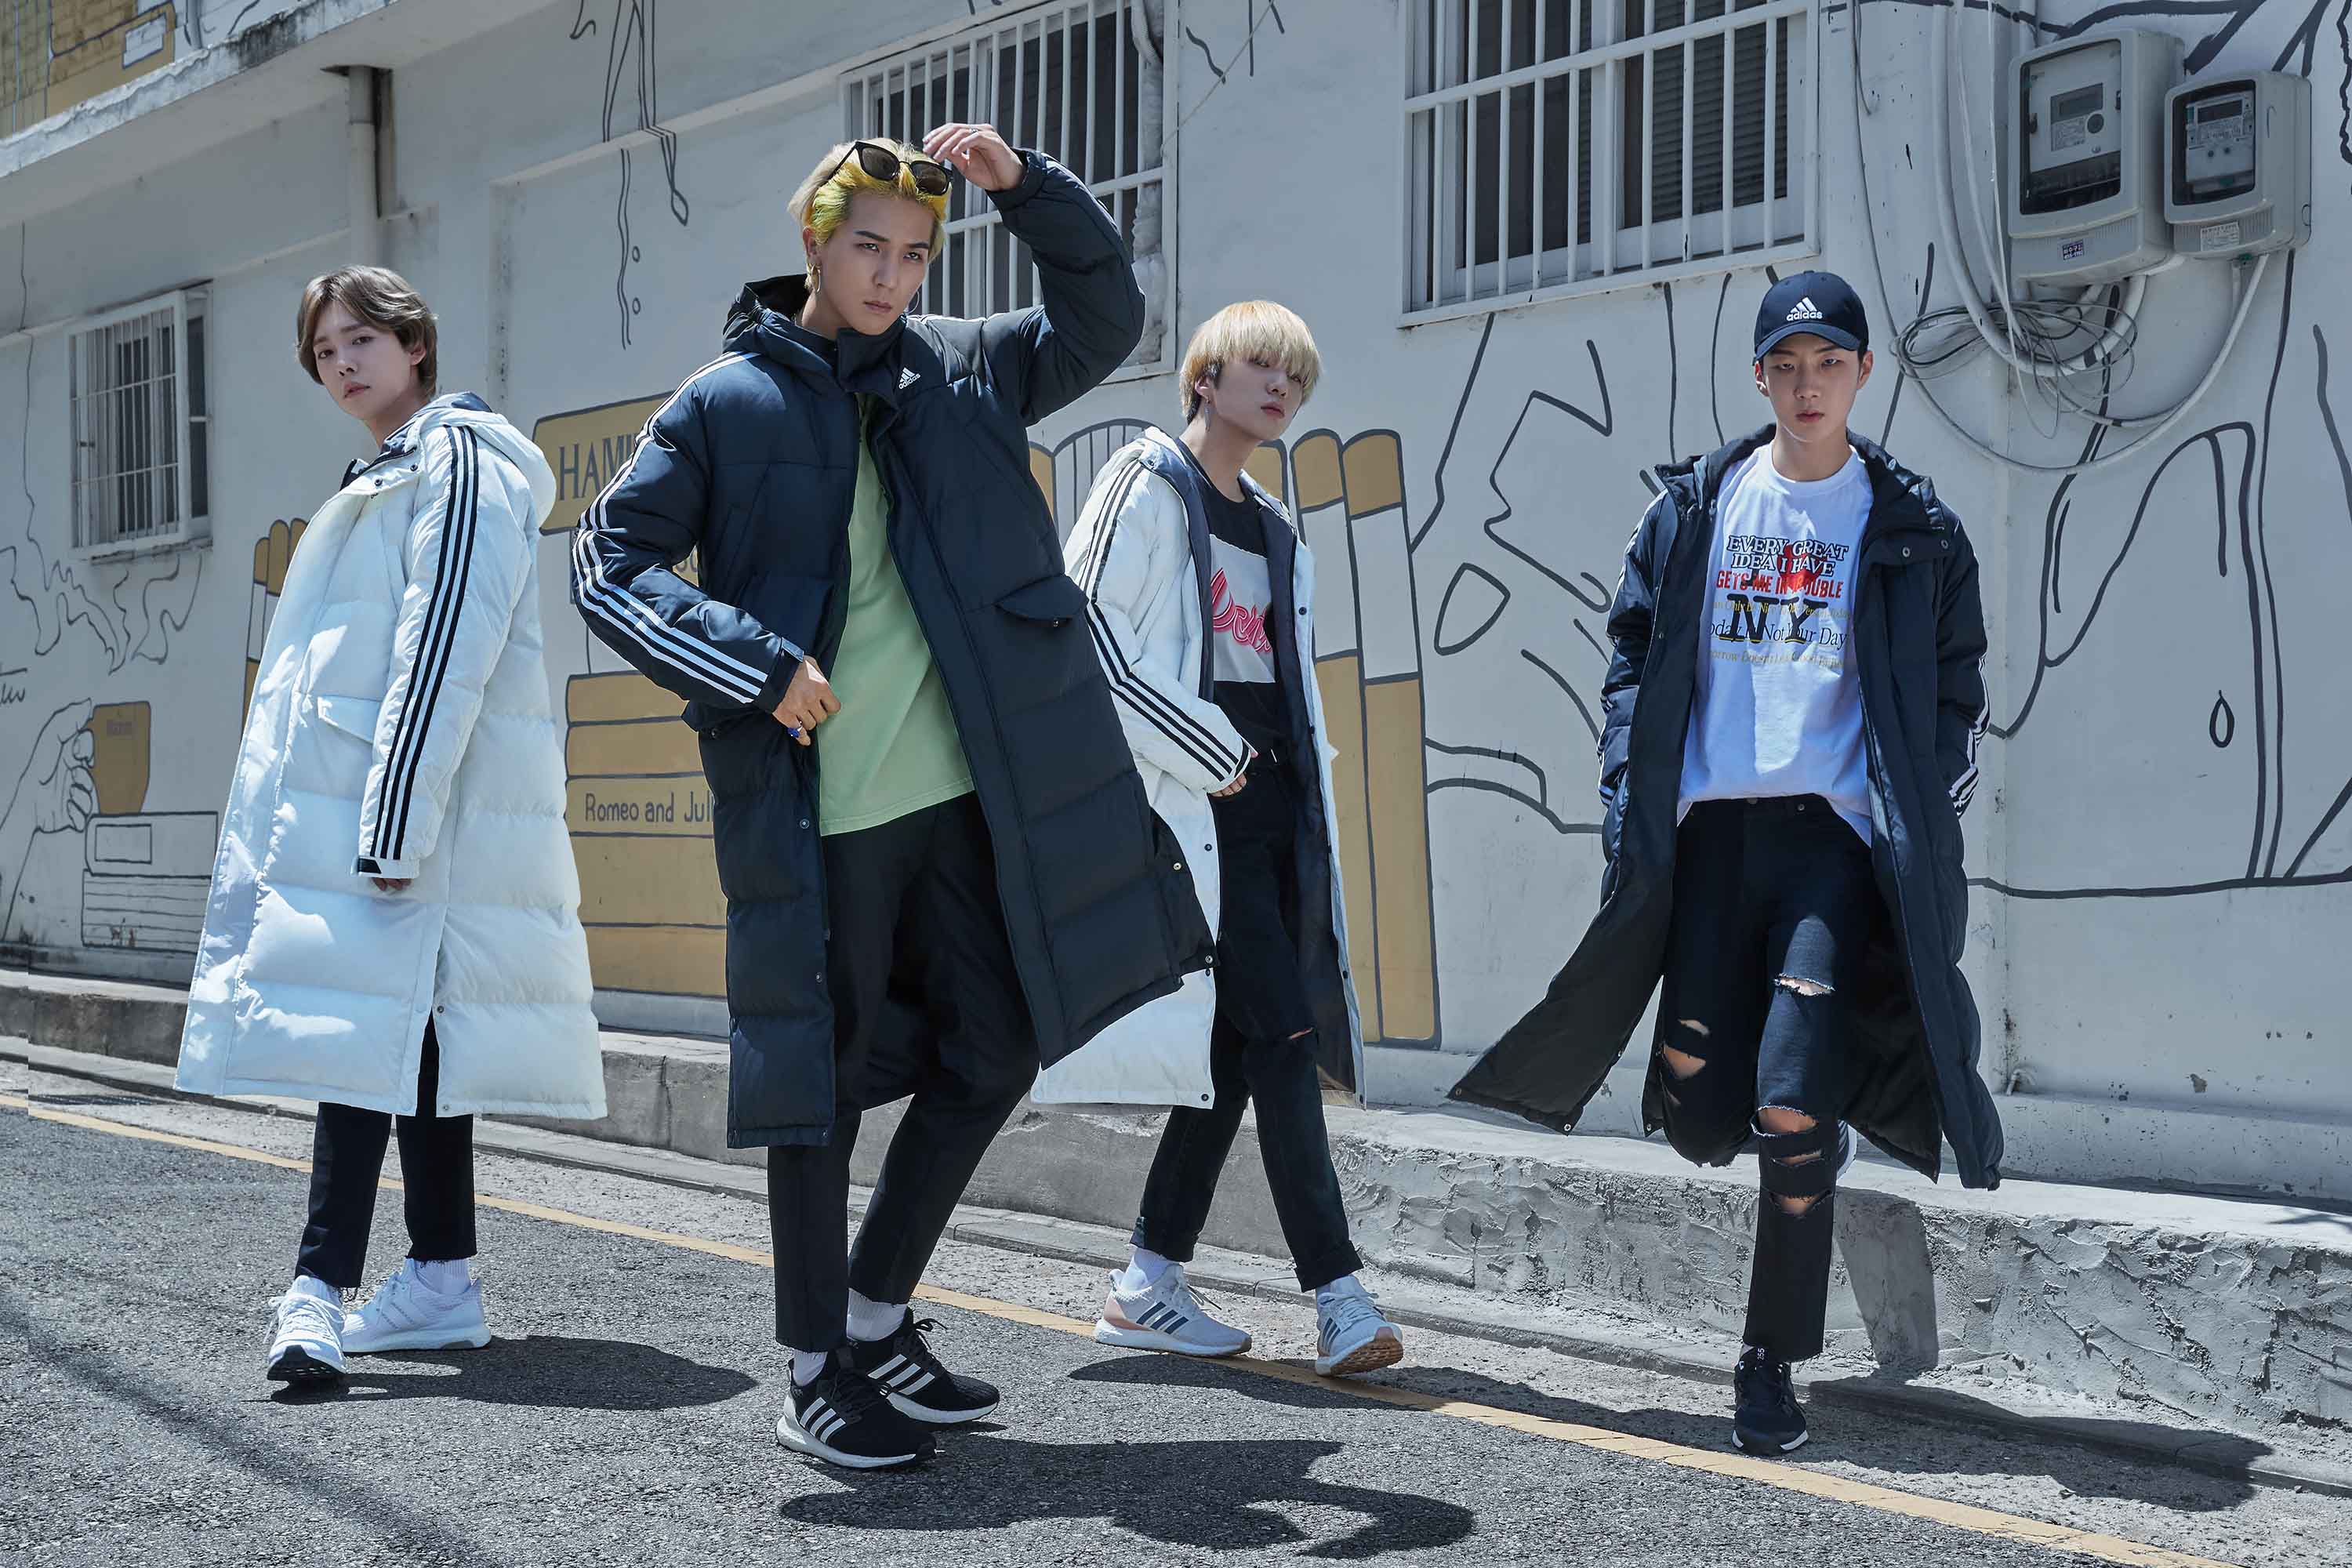 Stylish Long padding pictures of the group Black Pink and WINNER have been released.Adidas, a global leading sports brand, released two Long paddings with sporty and stylish designs for the full winter season and released a picture with Black Pink and WINNER.In this picture, Long padding, which is worn to protect the body from the cold, was interpreted as a new perspective and showed in a more stylish style.In particular, Black Pink sublimated the long padding, which can seem somewhat rugged, with a free and hip sensibility and expressed it as a modern fashion item.Meanwhile, Adidas will also hold events for purchasing customers to commemorate the launch of this product.A total of 100 people, 50 of whom will be awarded a lottery, will receive a Black Pink fan Members Only in November or a WINNER fan Members Only entry ticket on October 27.In addition, a total of 60 people, 30 people, will be provided with WINNER or Black Pink sign CD, and a total of 2,000 people will be provided with Adidas Winter Bromide.Photo Adidas